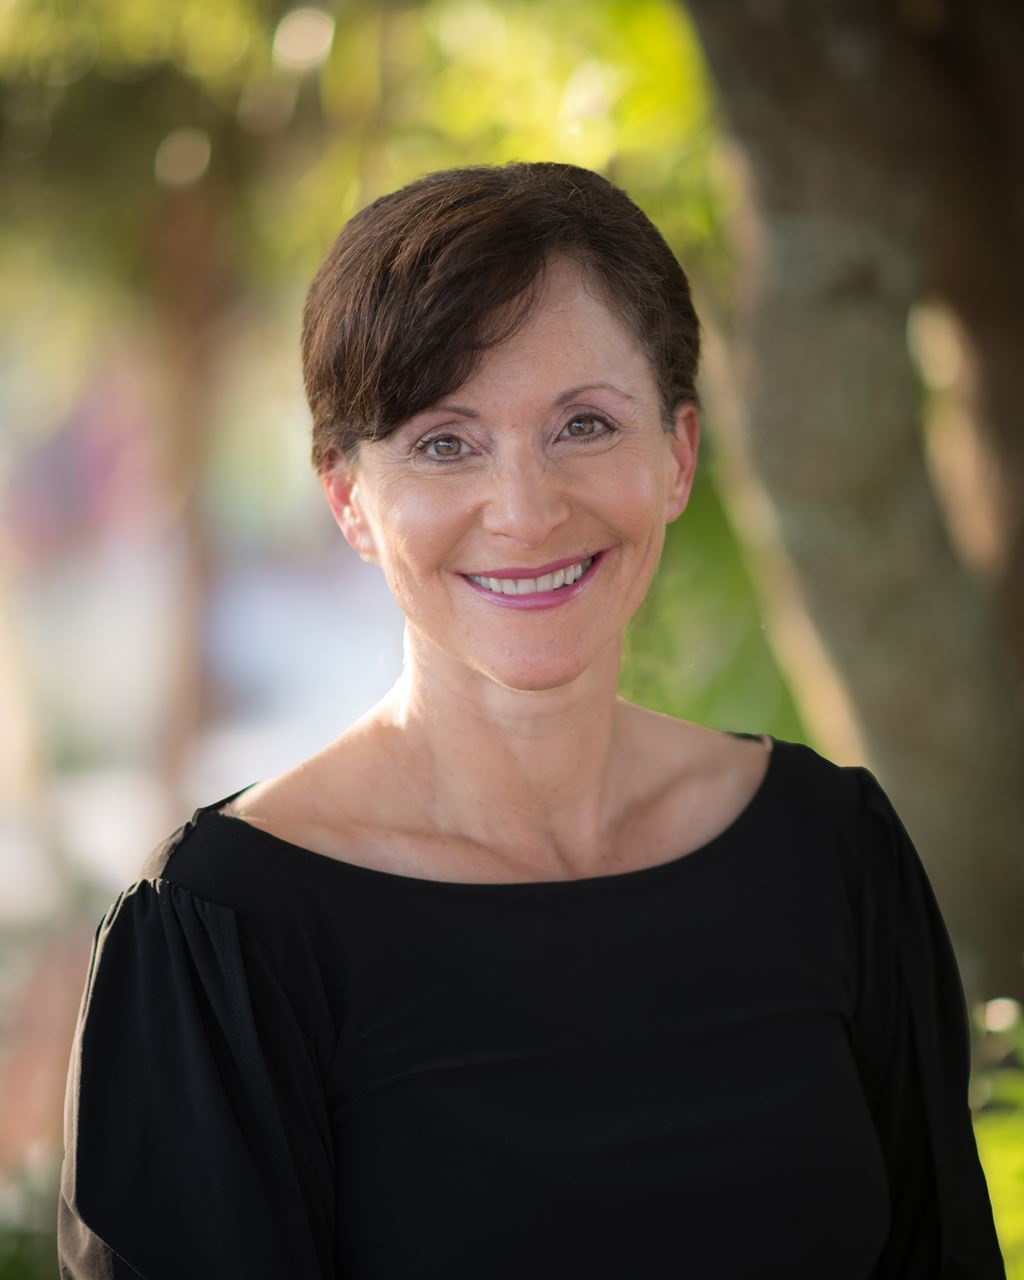 As Friends of Myakka River's first full-time Executive Director, Miri Hardy, PhD will continue to grow the non-profit's environmental education impact, while increasing financial support of Myakka River State Park.